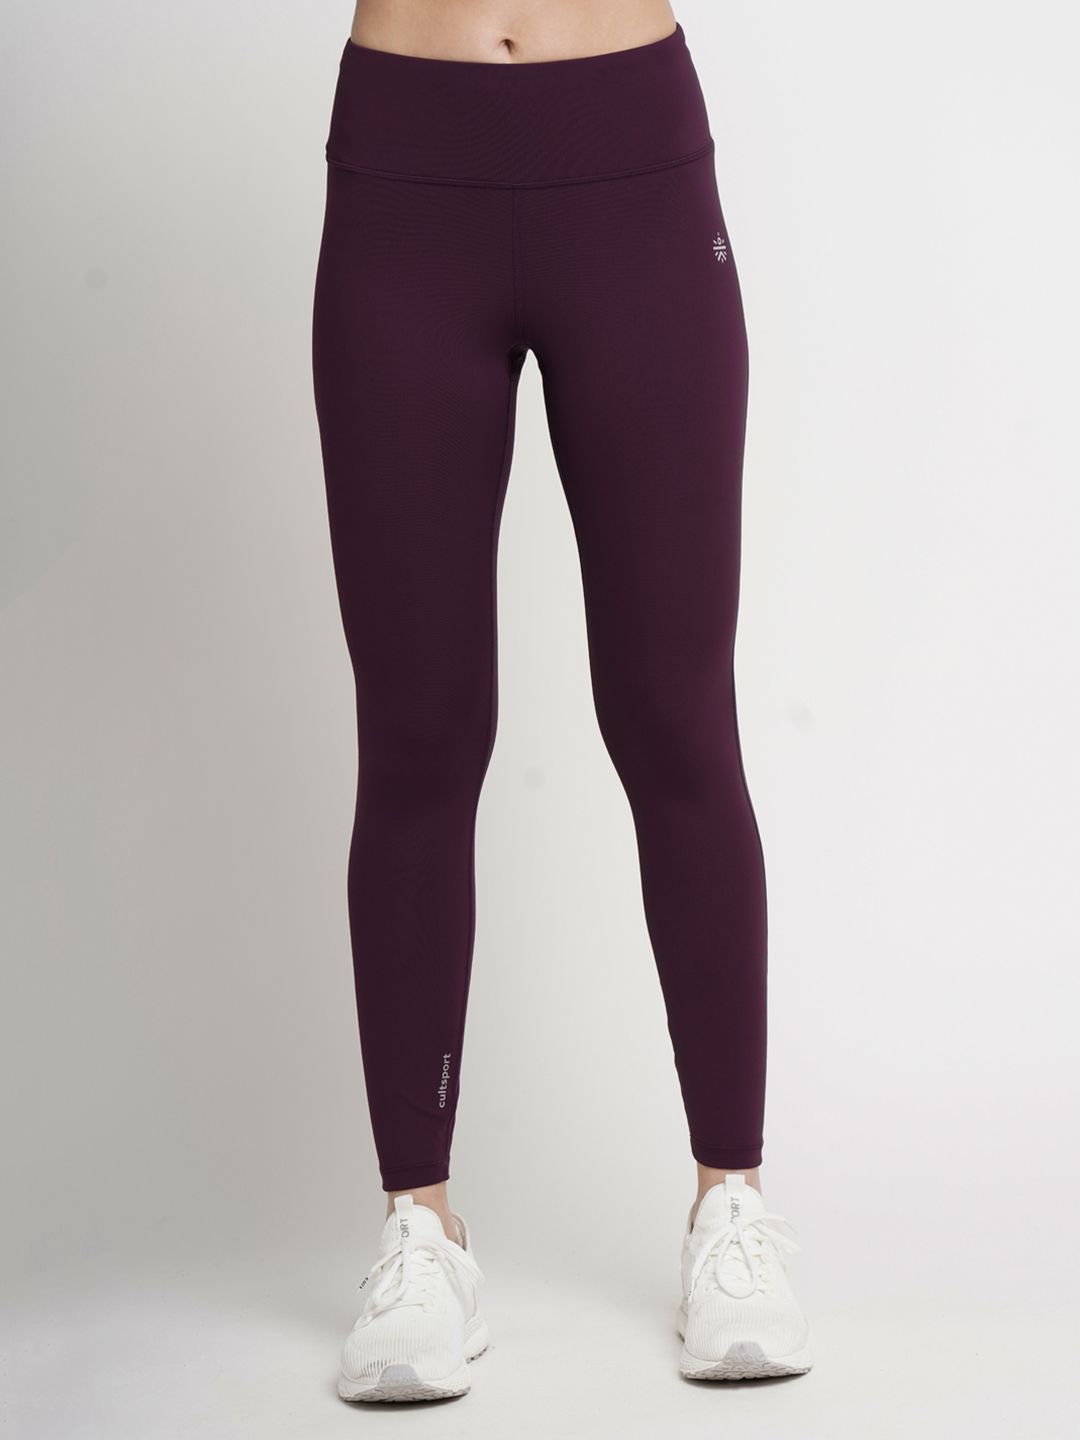 Cultsport Women Burgundy Solid Anti-Microbial Workout Leggings Price in India